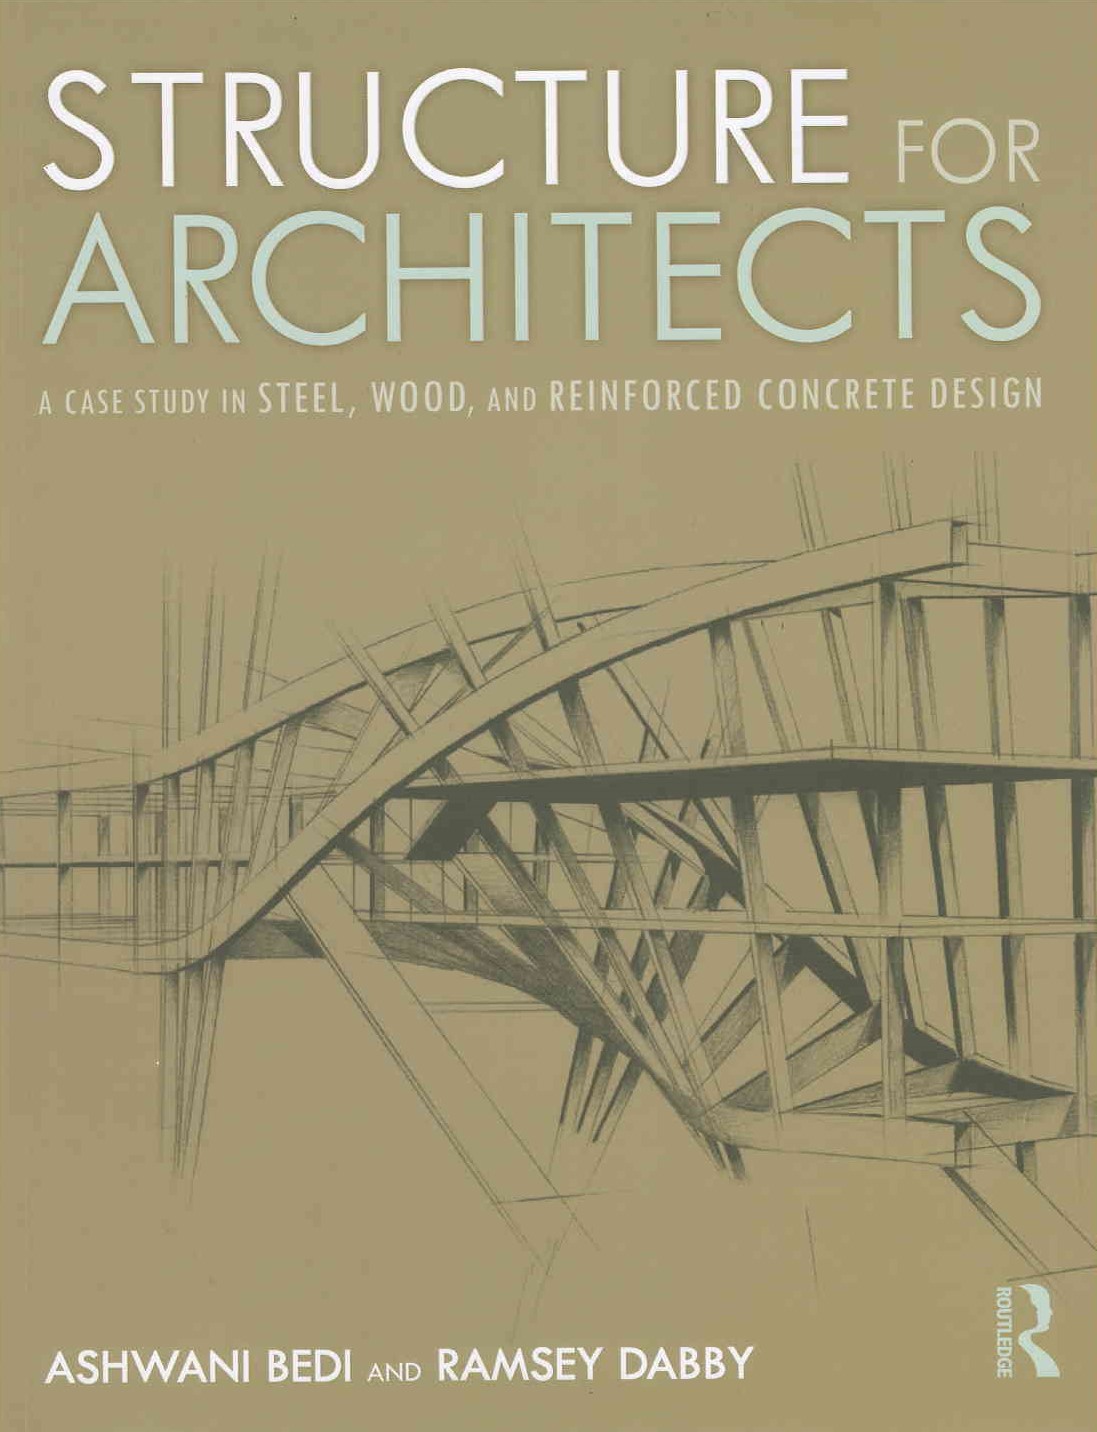 Structure for architects : a case study in steel, wood, and reinforced concrete design